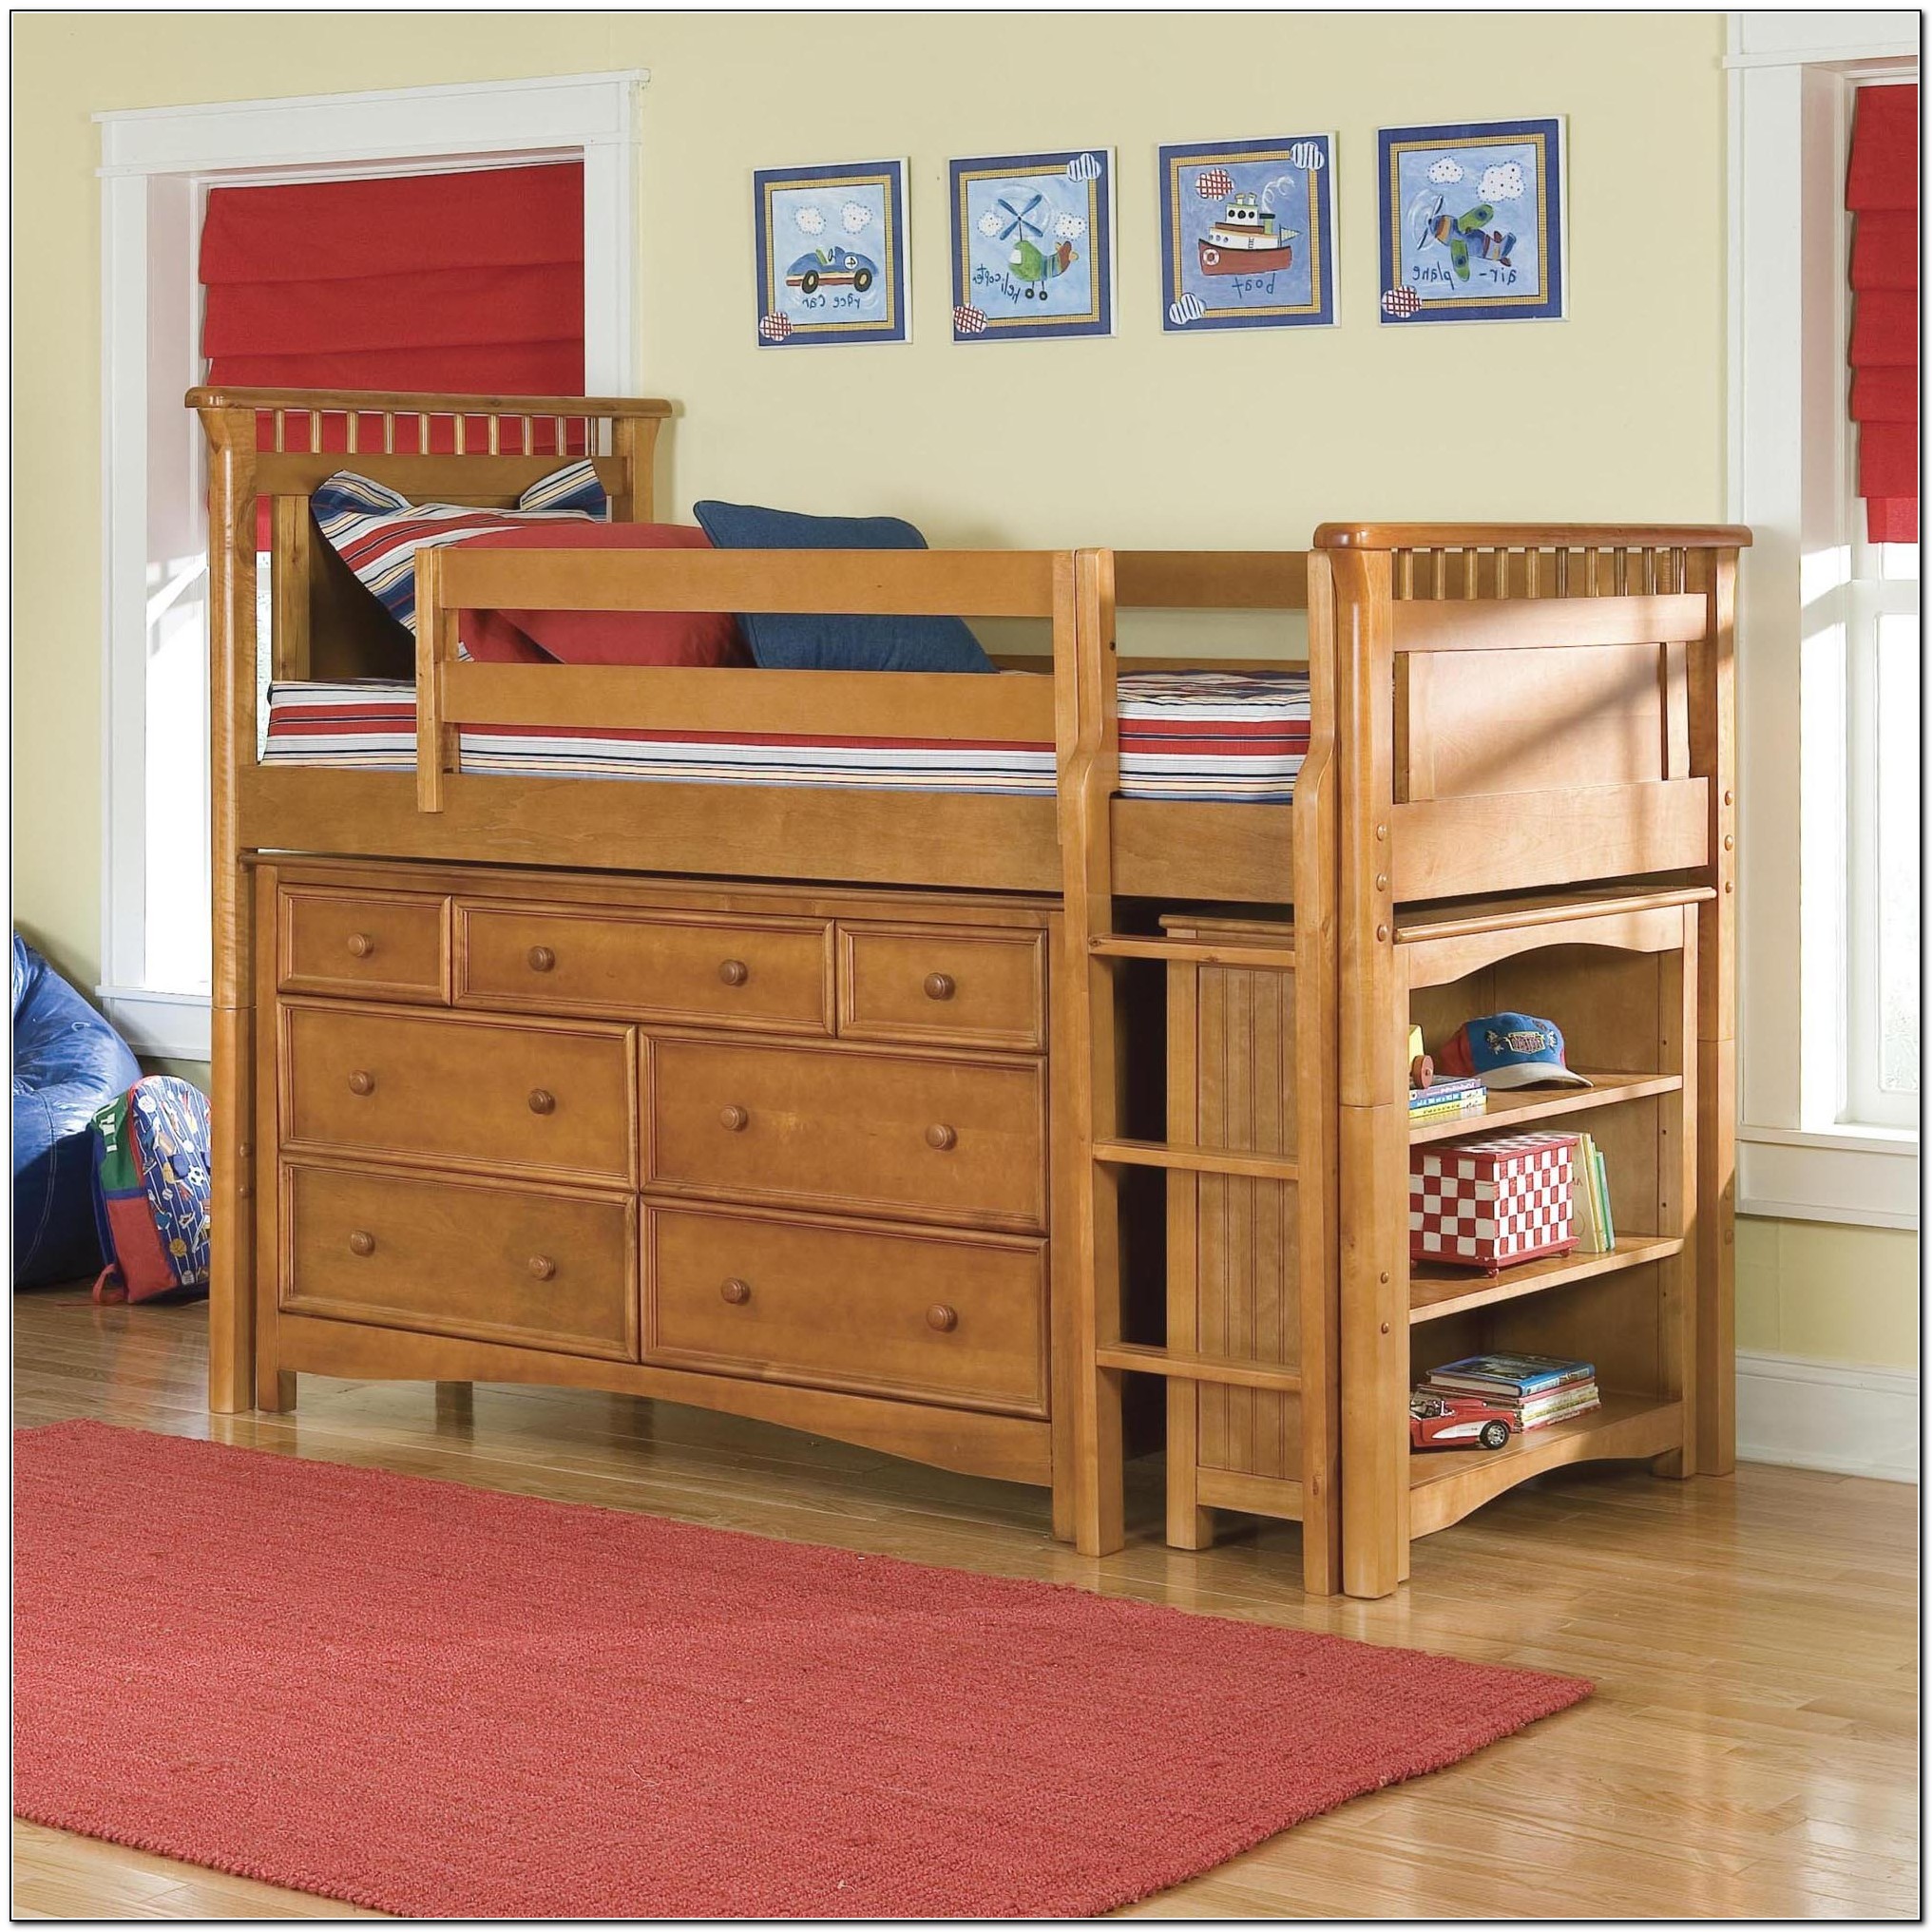 Bed With Drawers And Shelves